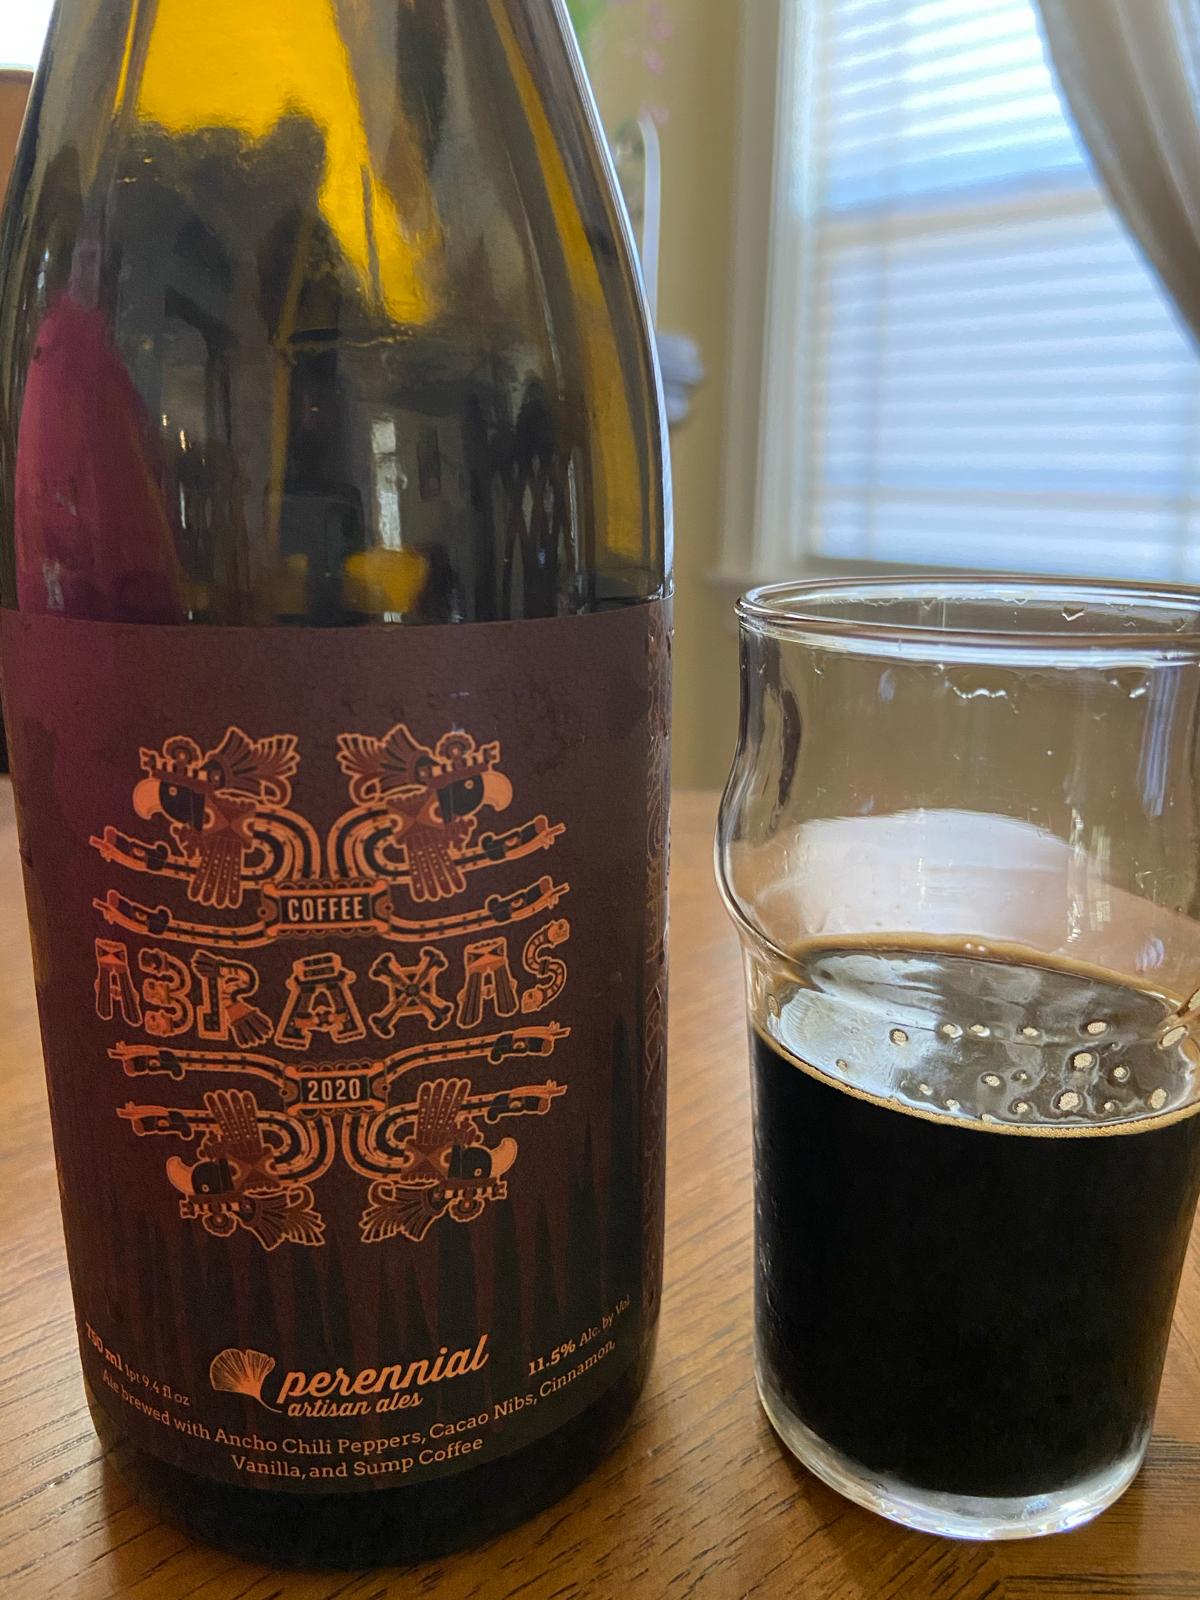 Abraxas with Coffee